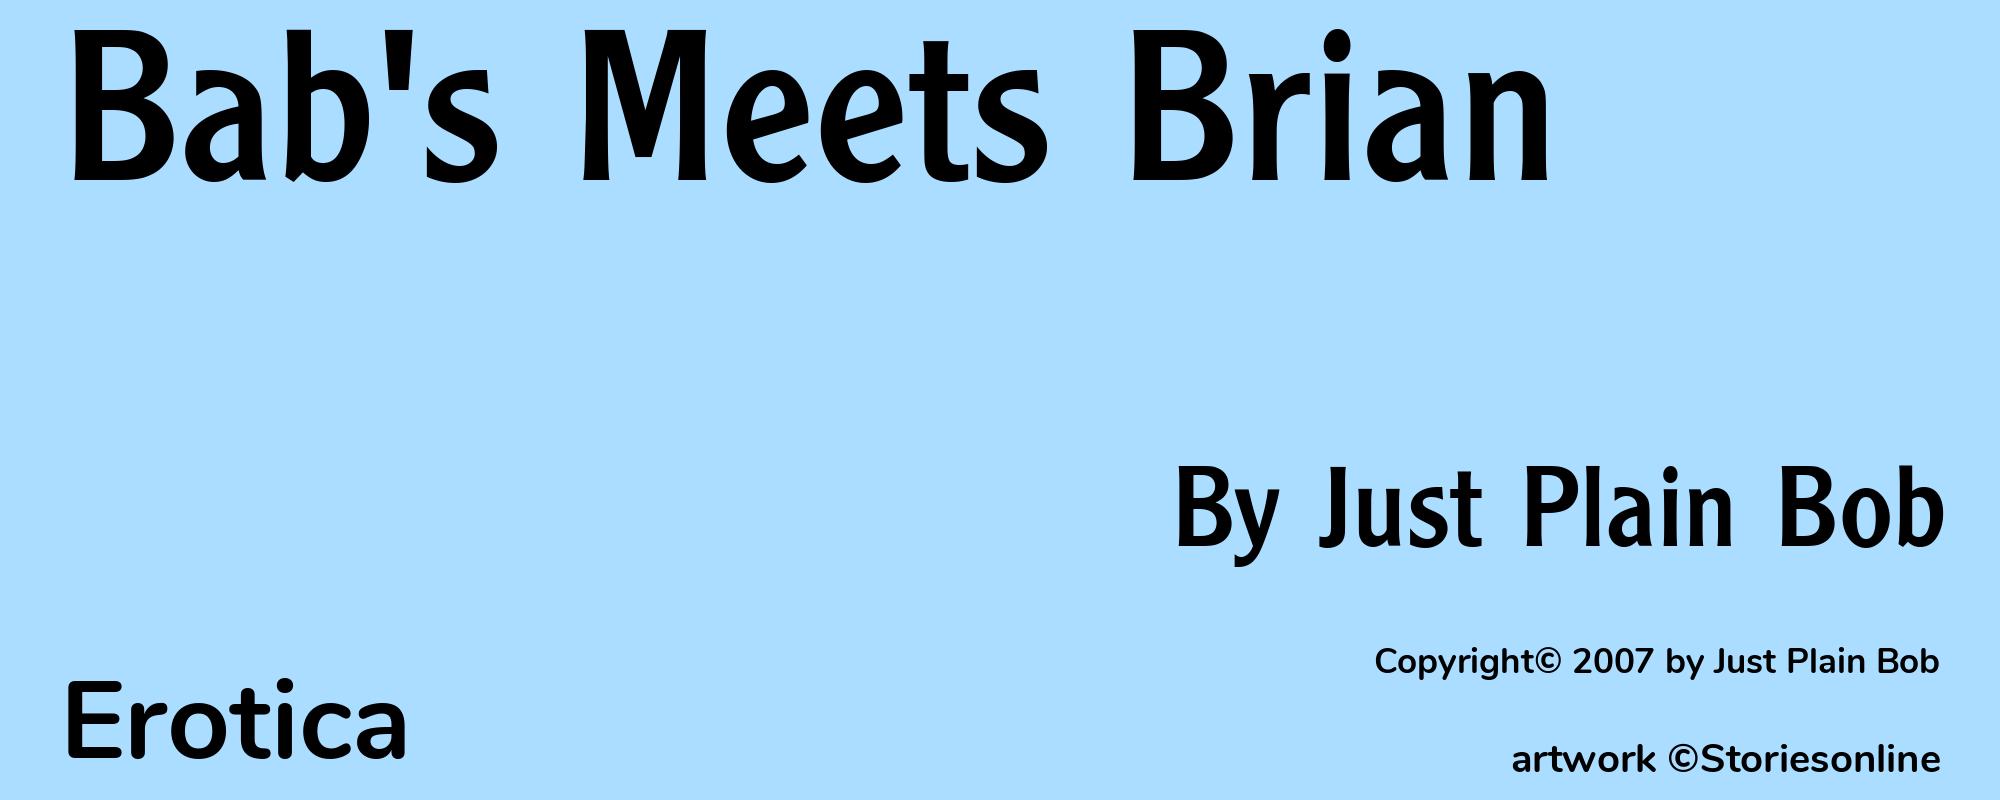 Bab's Meets Brian - Cover